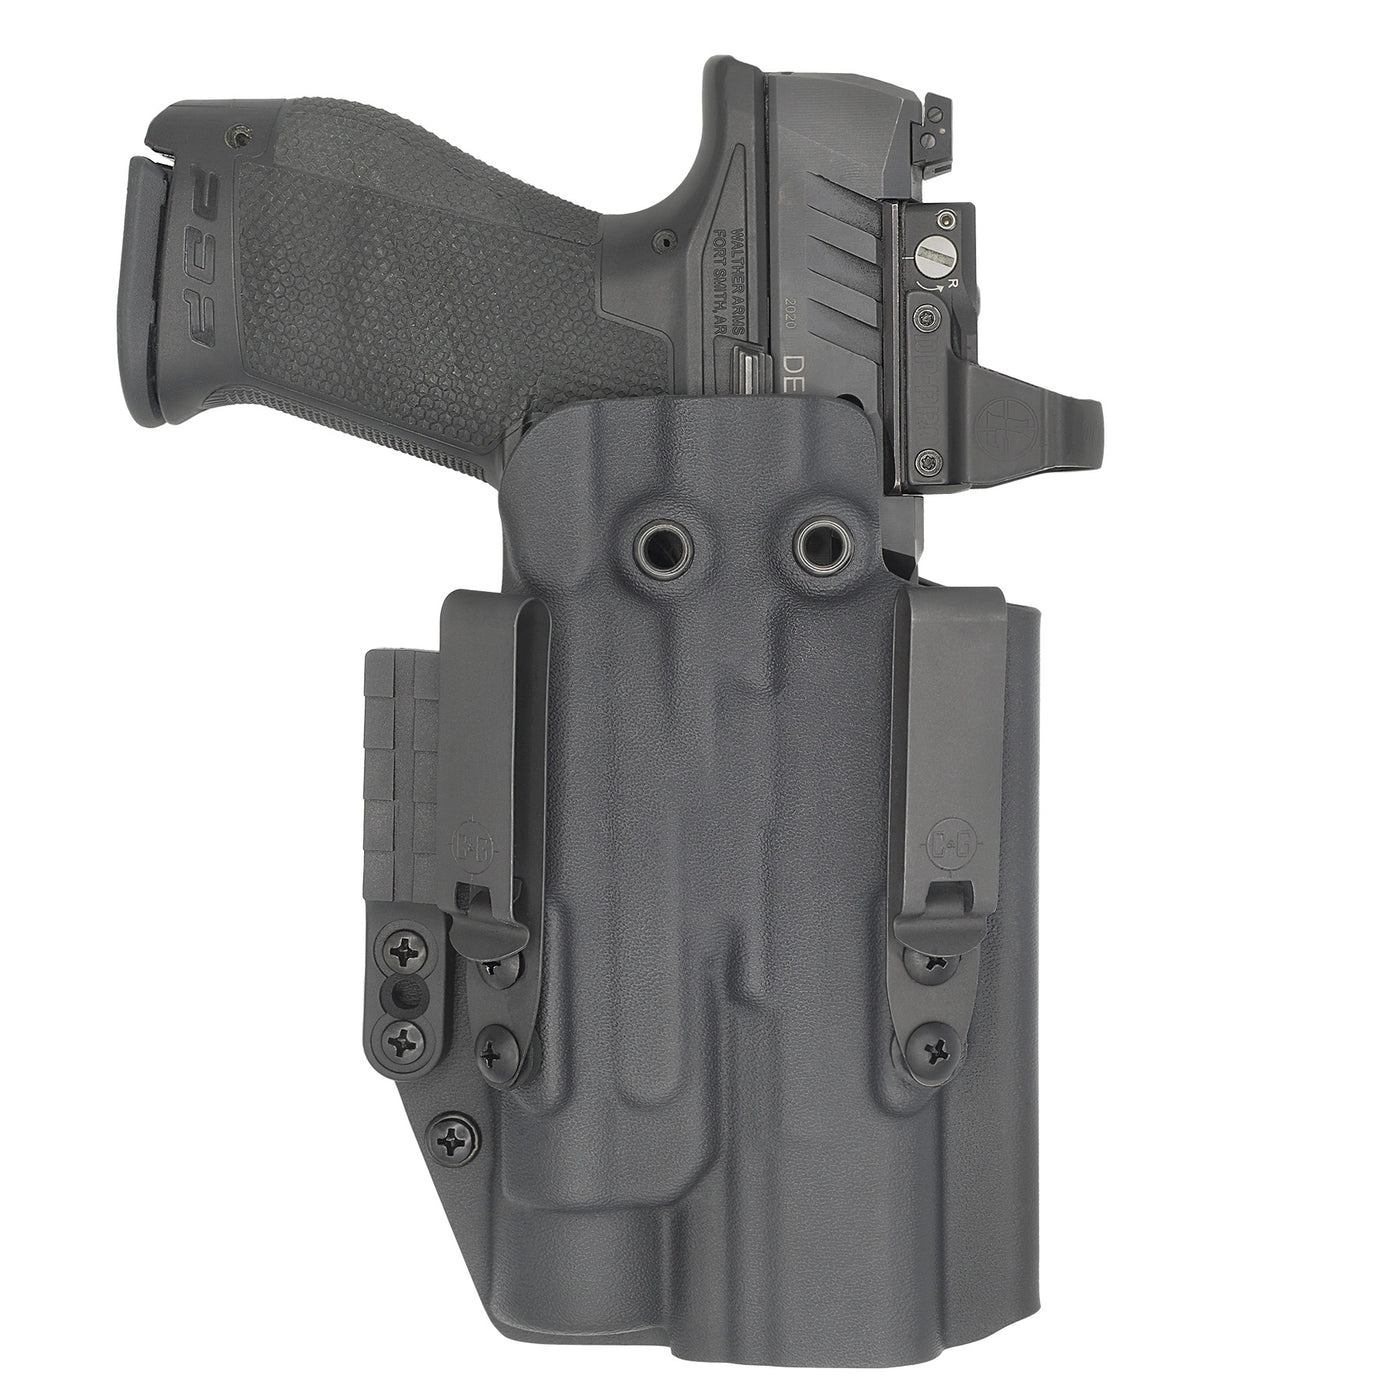 C&G Holsters Quickship IWB Tactical ALPHA UPGRADE S&W M&P 10/45 Streamlight TLR-1 in holstered position